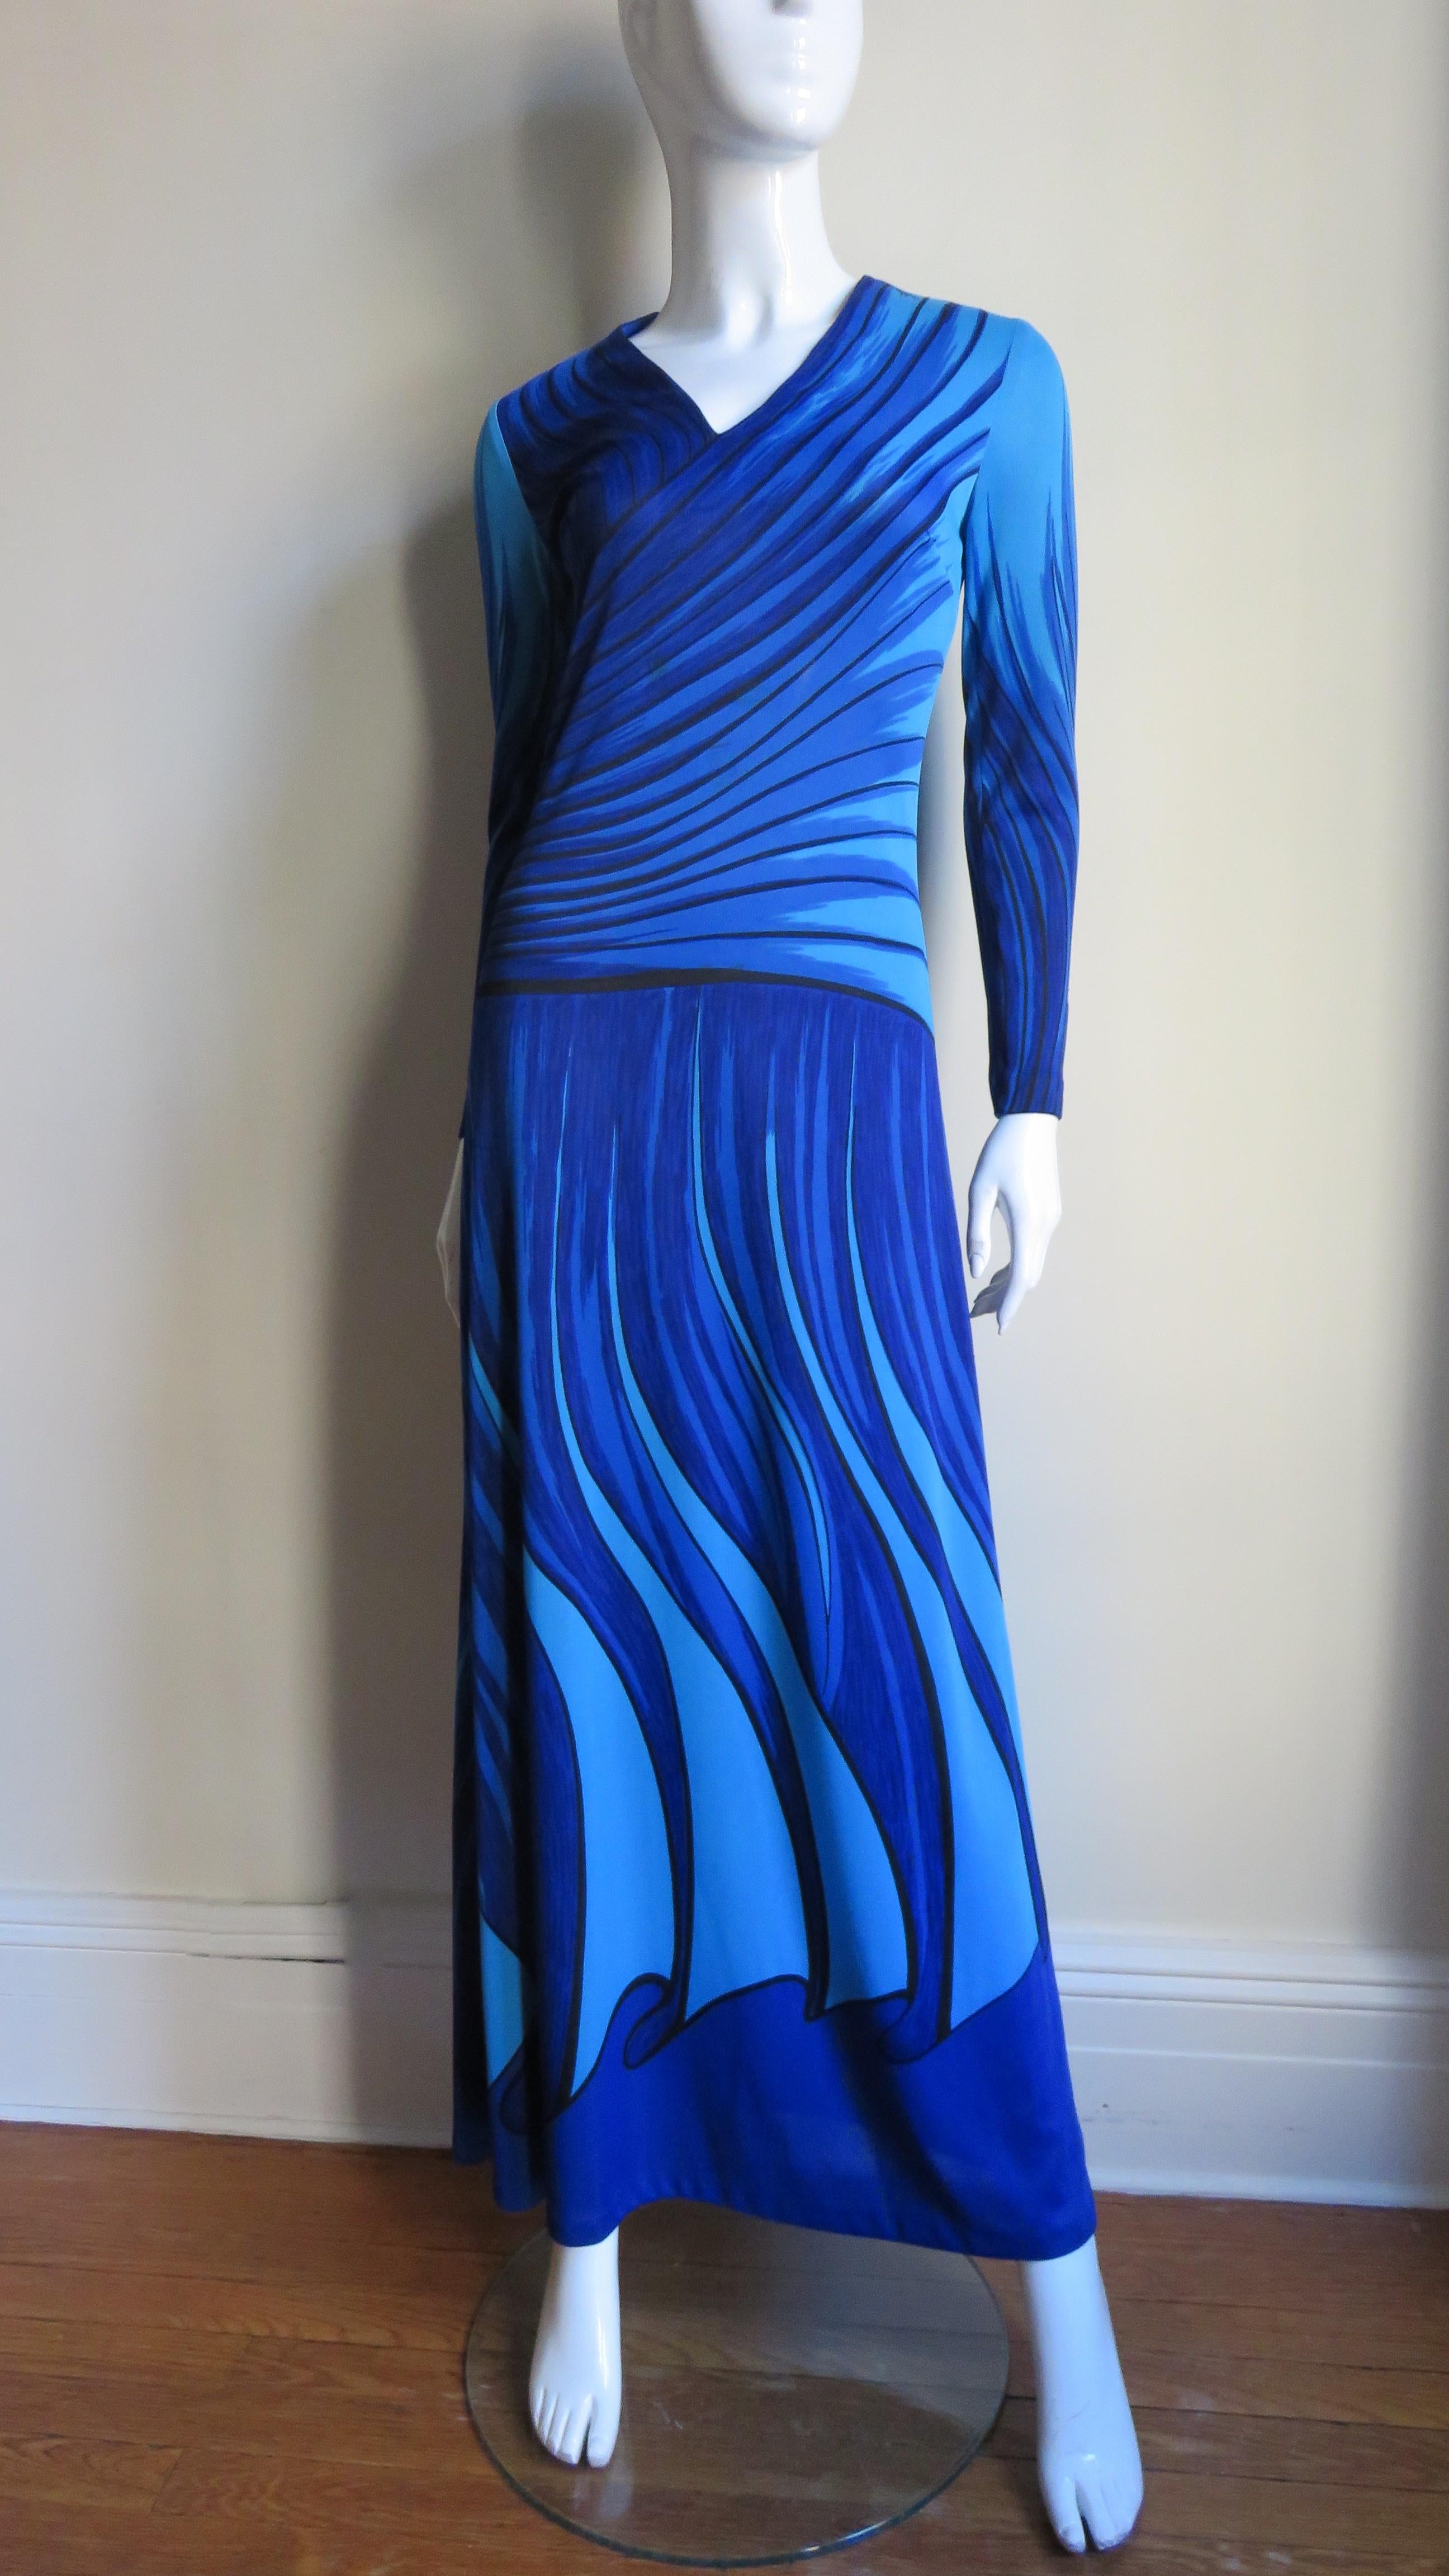 A trompe l'oeil pattern jersey maxi dress from Roberta di Camerino in beautiful shades of blue.  There is a draping pattern in the print, trompe l'oeil meaning 